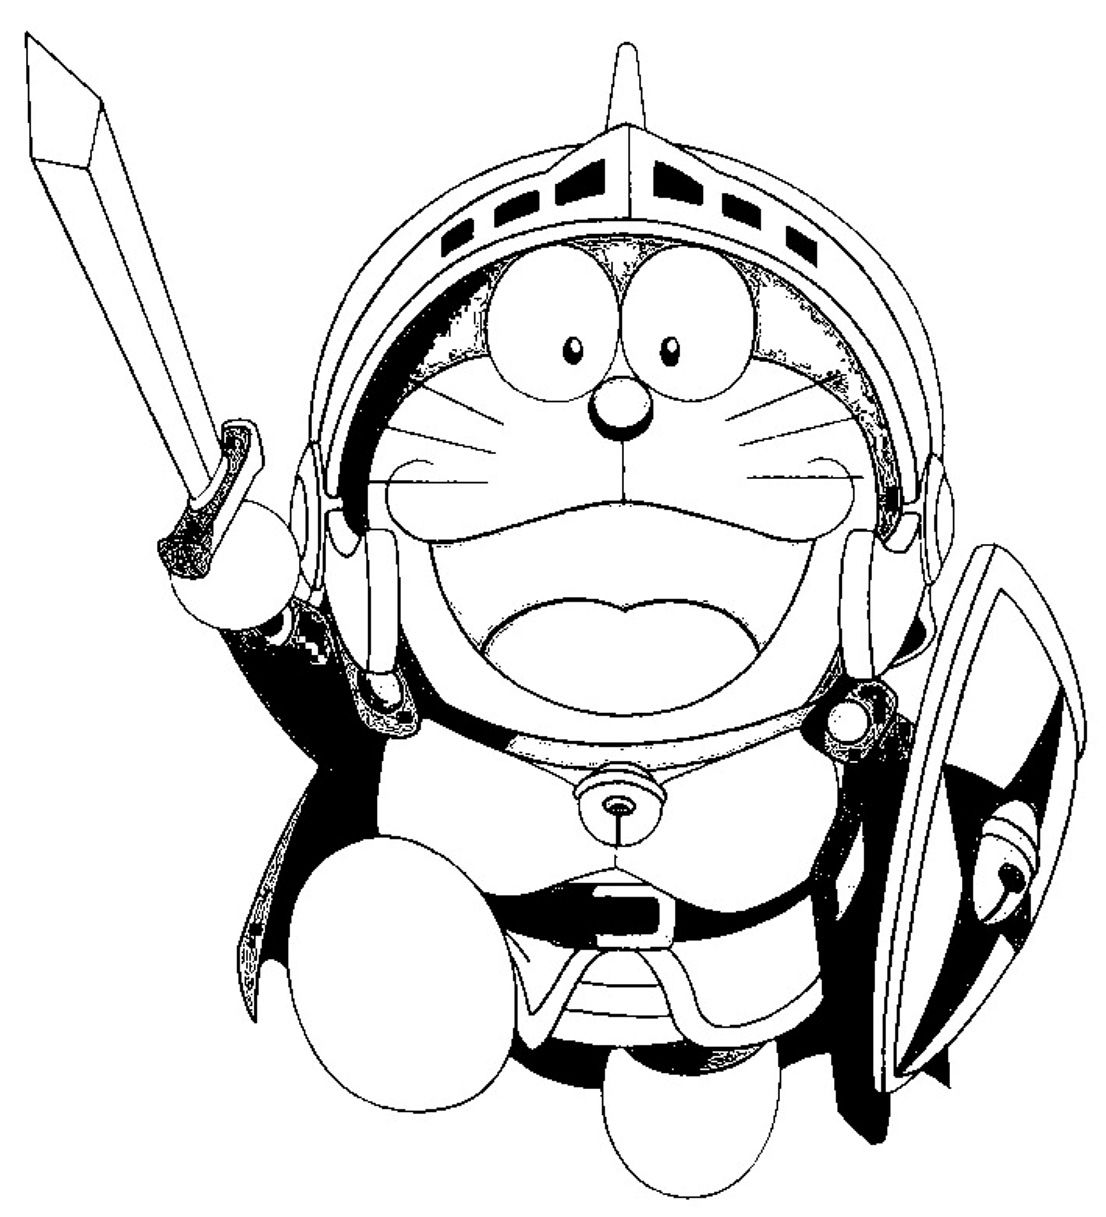 Cartoon Coloring Pages Doraemon | Cartoon Coloring pages